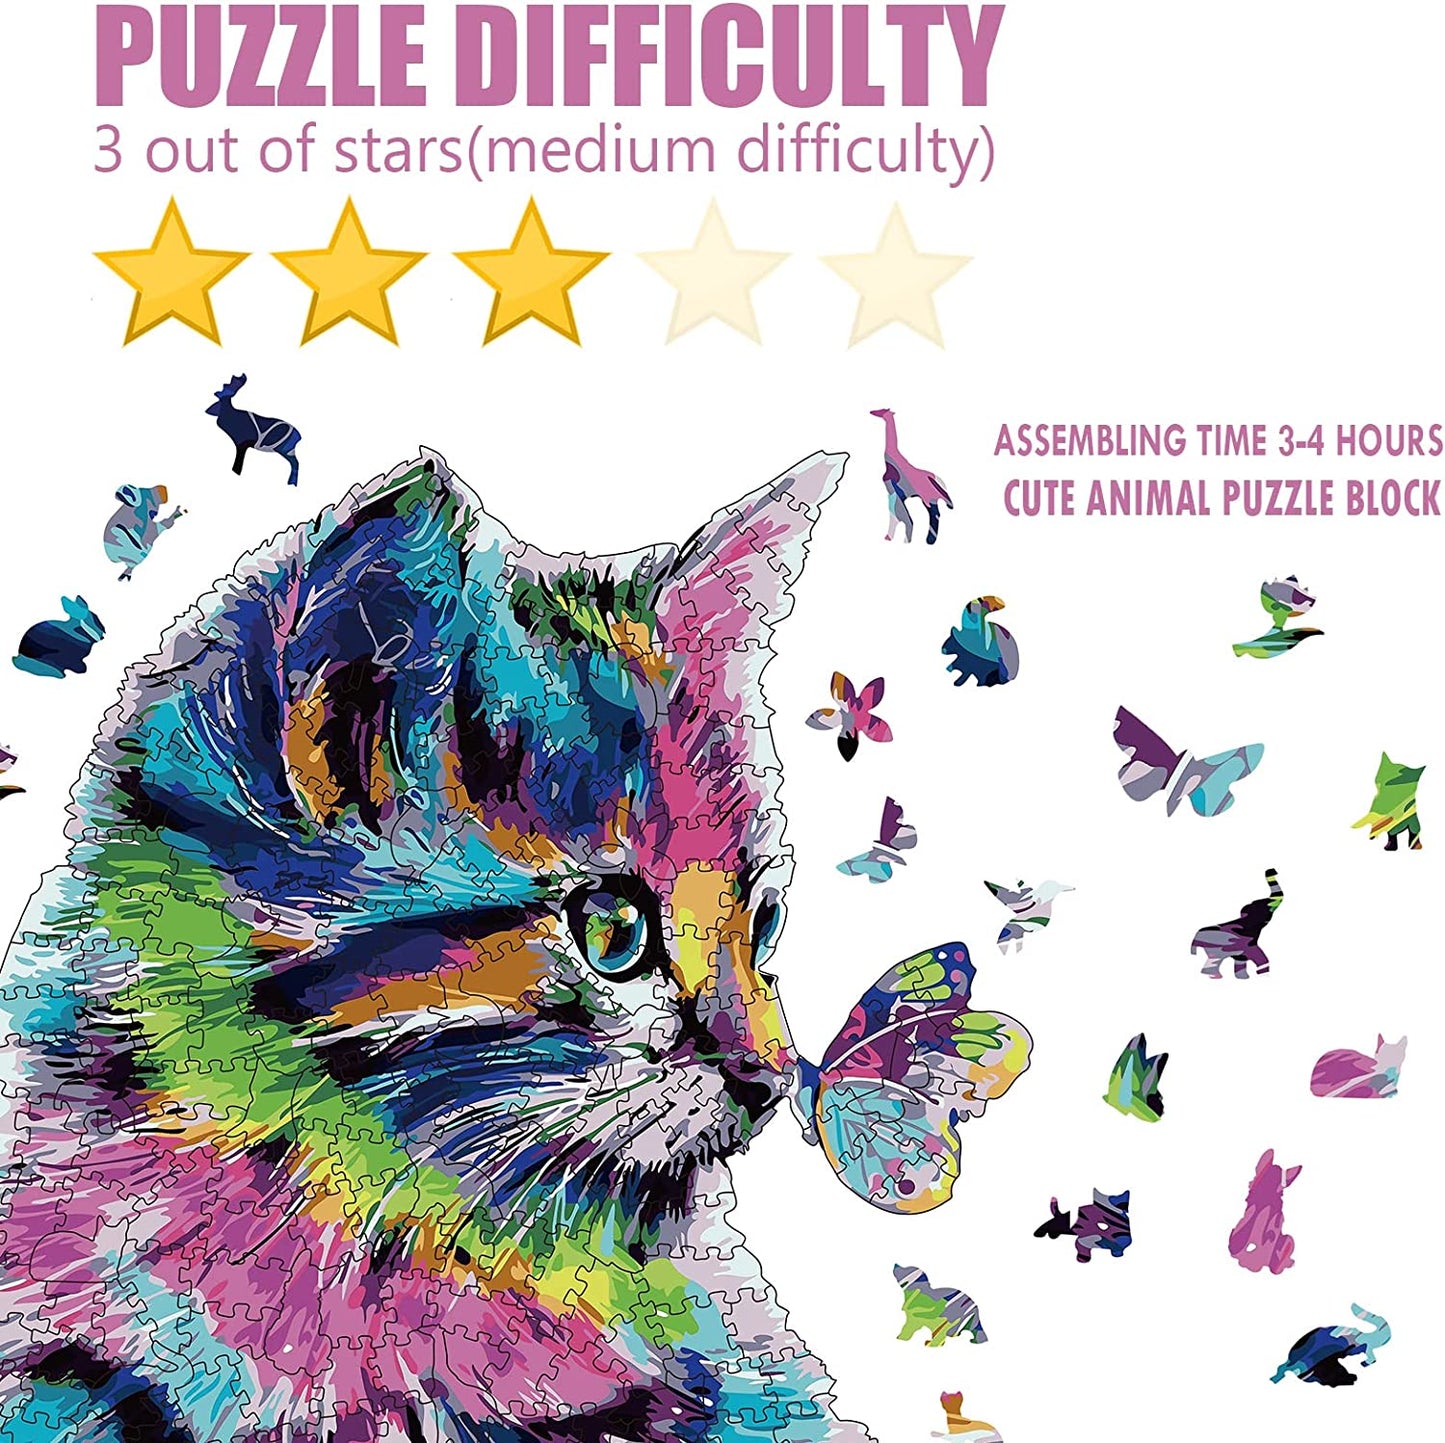 Wooden Puzzle for Adults, Wooden Jigsaw Puzzles for Adults and Kids, Wood Puzzles Adult, Wood Cut Animal Shaped Cat Puzzles, Gift for Adults and Kids (11.2x11.8 inches, 200 Pieces)